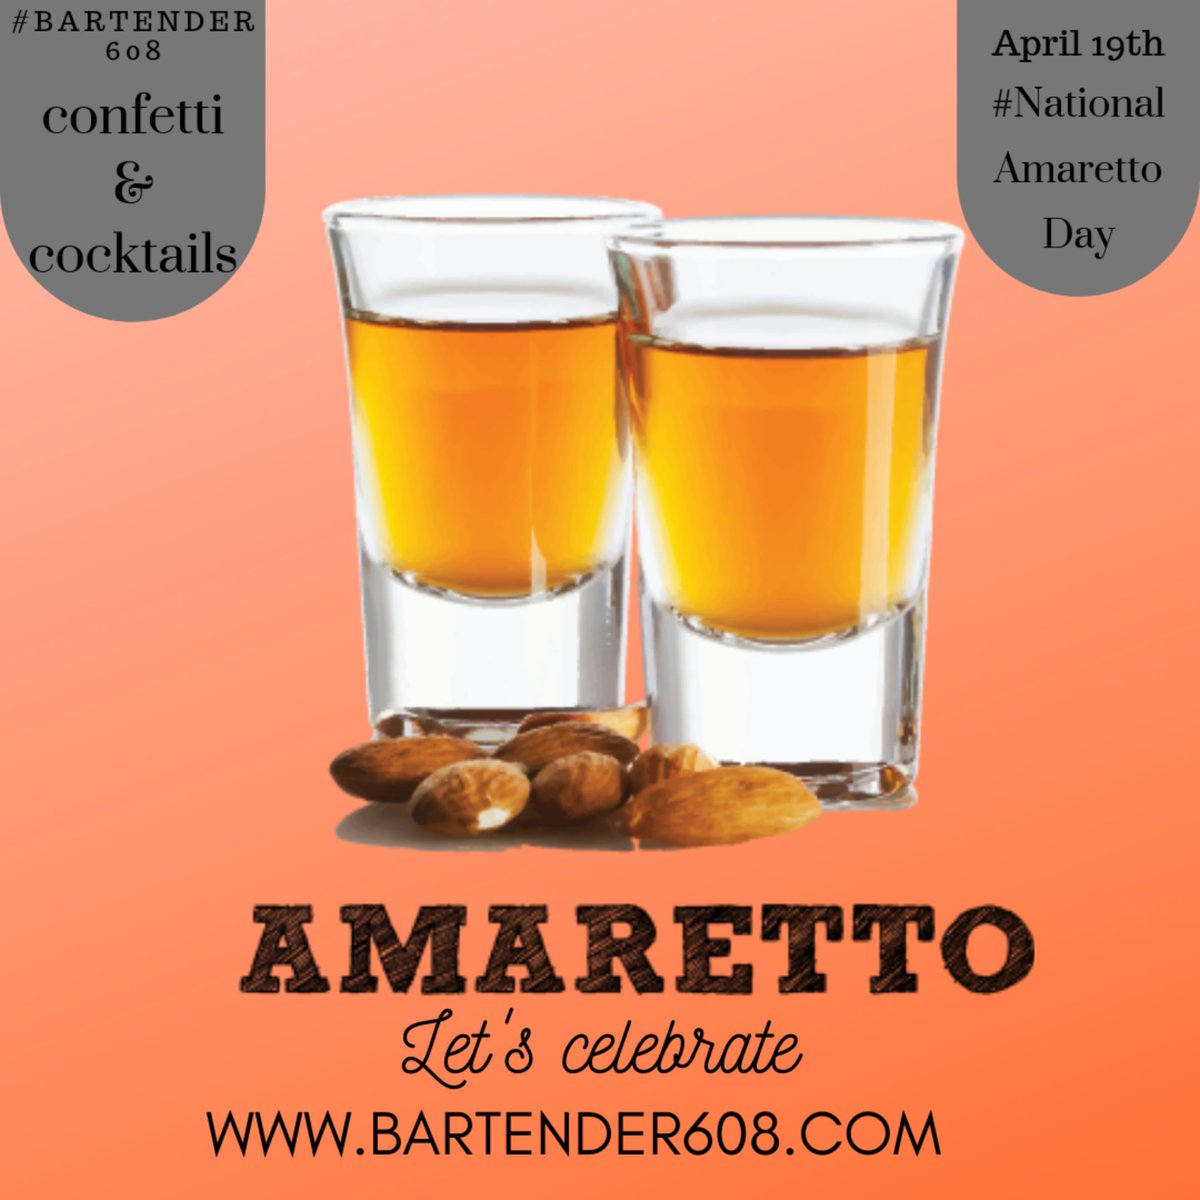 Today, April 19th is #NationalAmarettoDay! 
#NationalAmarettoDay2021
#AmarettoDay #AmarettoDay2021